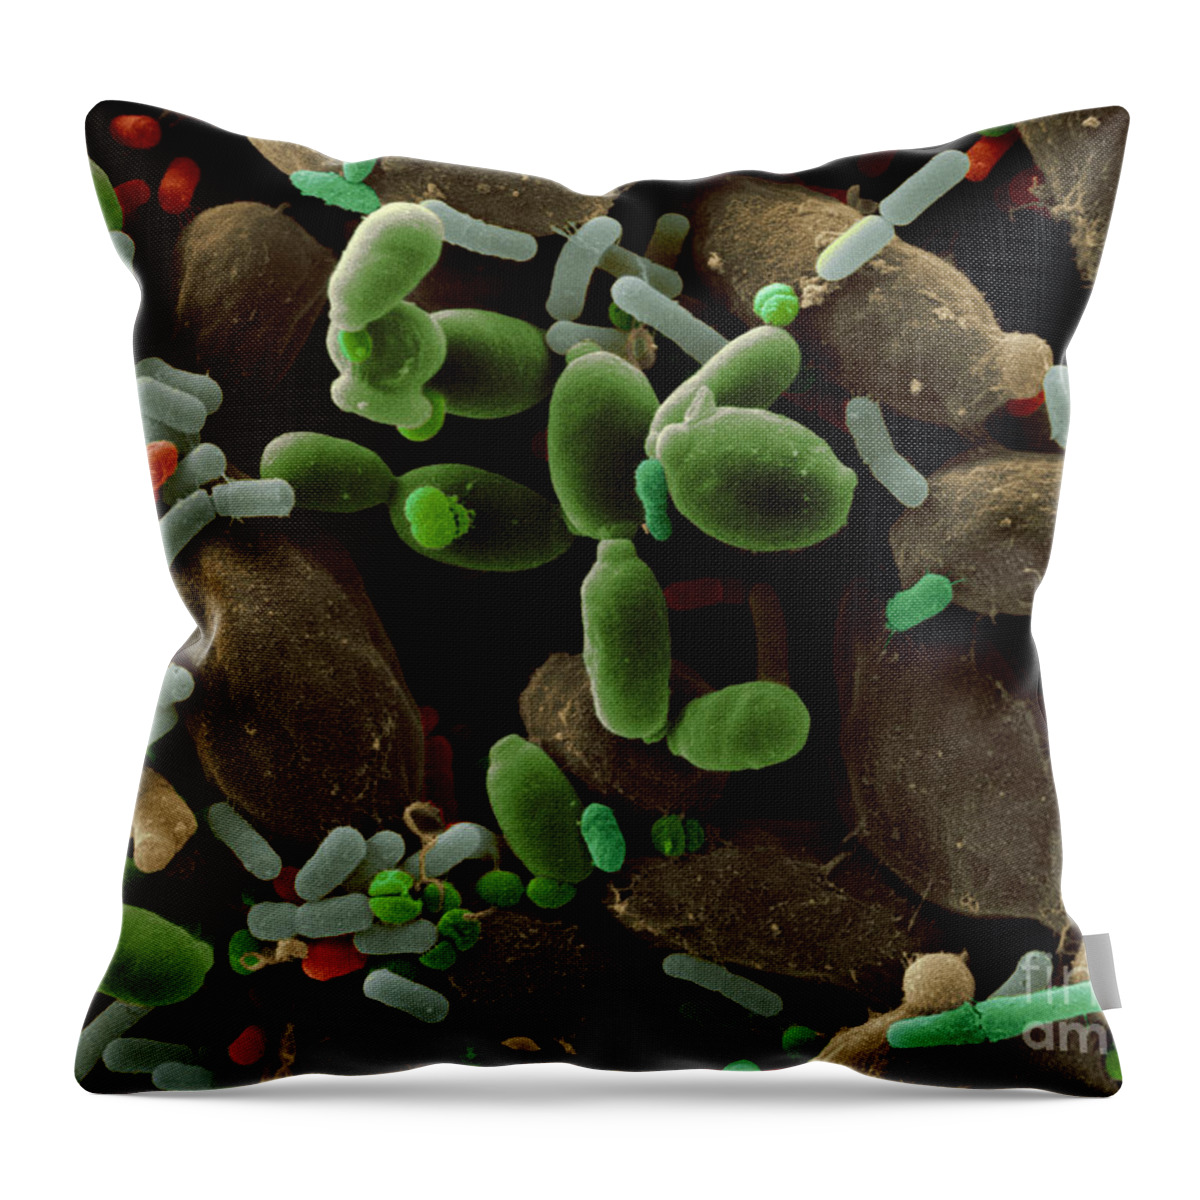 Microorganism Throw Pillow featuring the photograph Microorganisms On Cabbage by Scimat